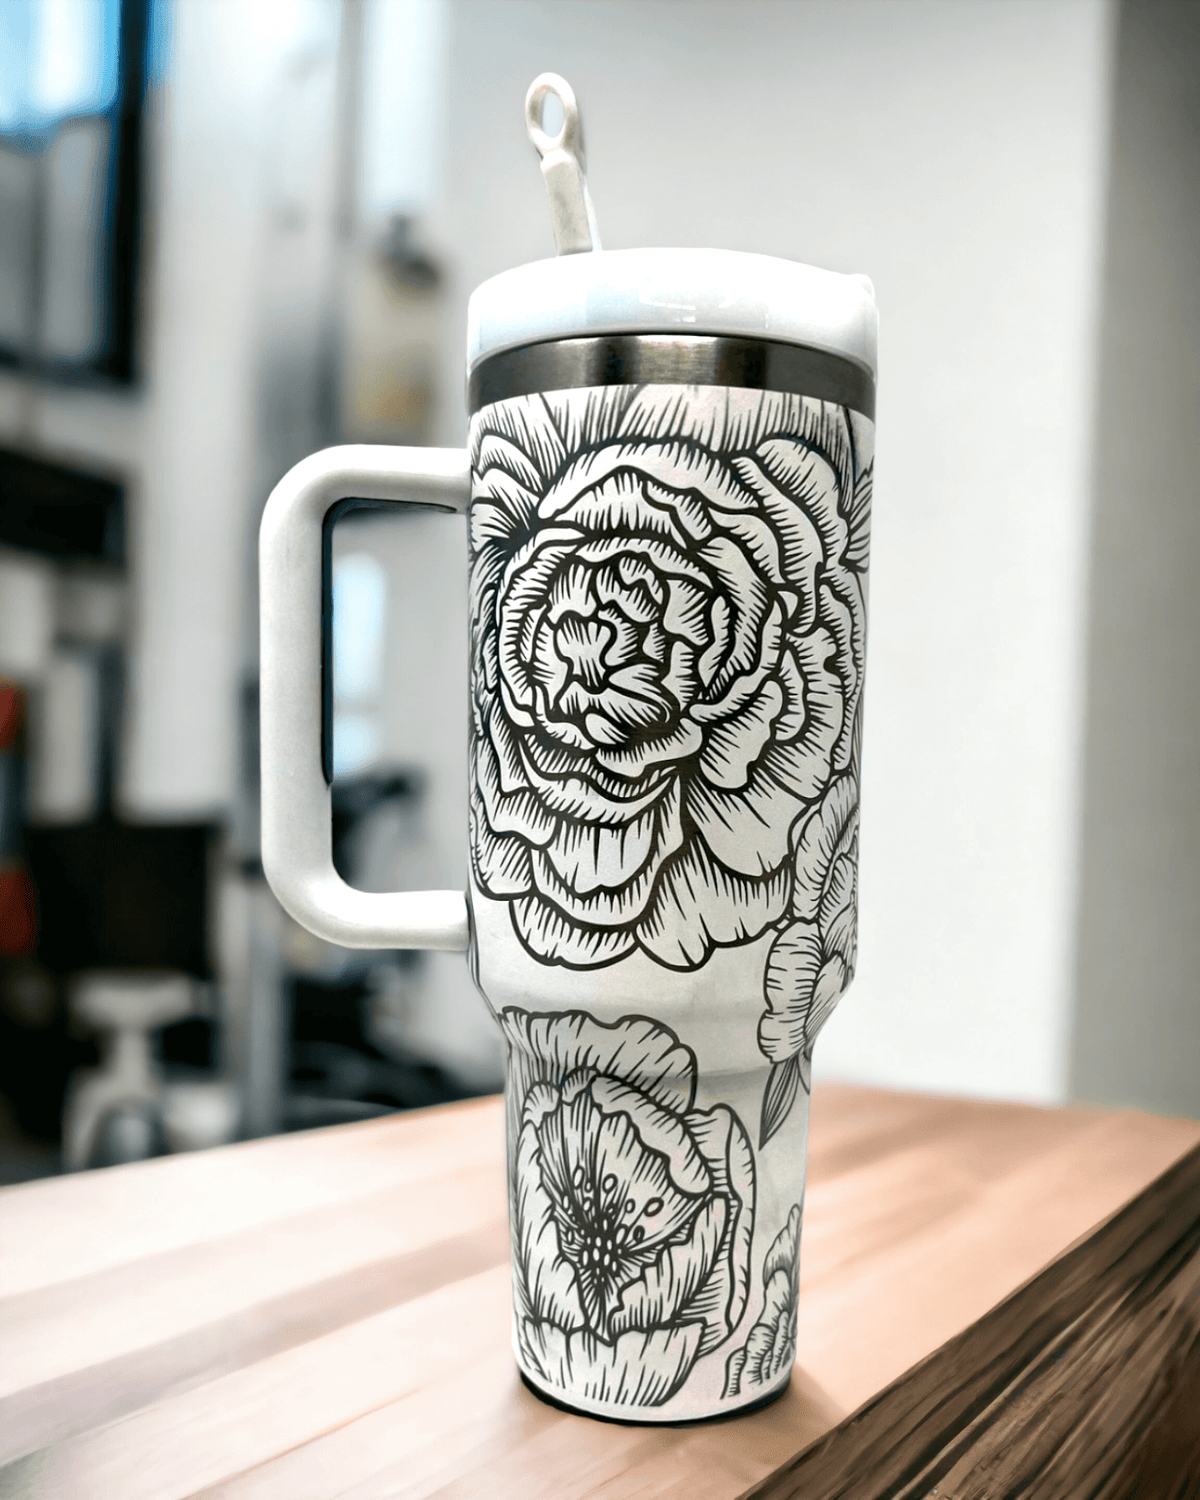 https://cdn.shopify.com/s/files/1/0606/5497/7184/files/wind-river-outpost-peony-40-oz-stanley-dupe_f1c9845a-d927-48e7-8dad-62e602690408_1200x.png?v=1690330116